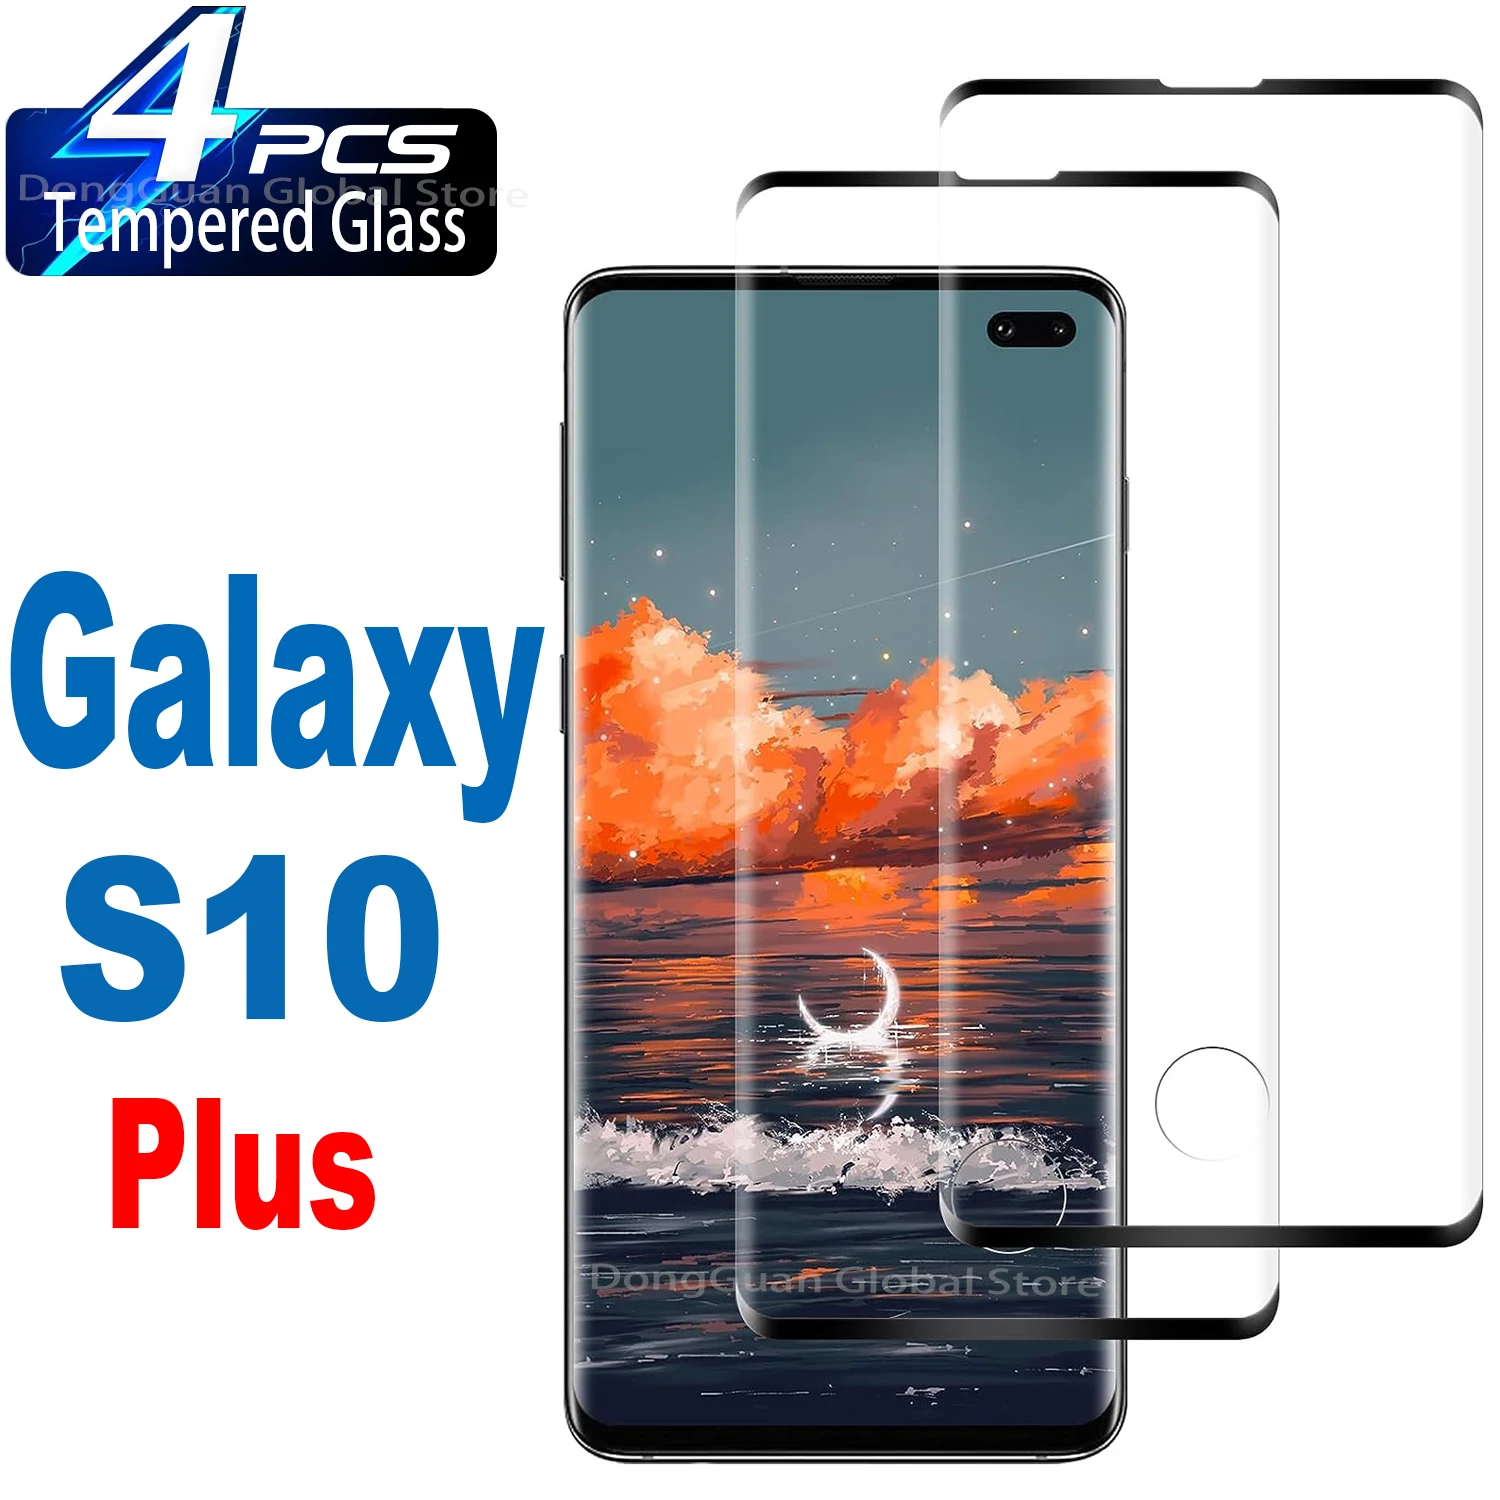 2/4Pcs Tempered Glass For Samsung Galaxy S10 Plus S10+ S20 S20+ Plus Screen Protector Glass curved anti spy tempered glass for samsung galaxy s20 s10 s9 s8 s10 plus s10e s20ultra privacy screen protector anti peep film